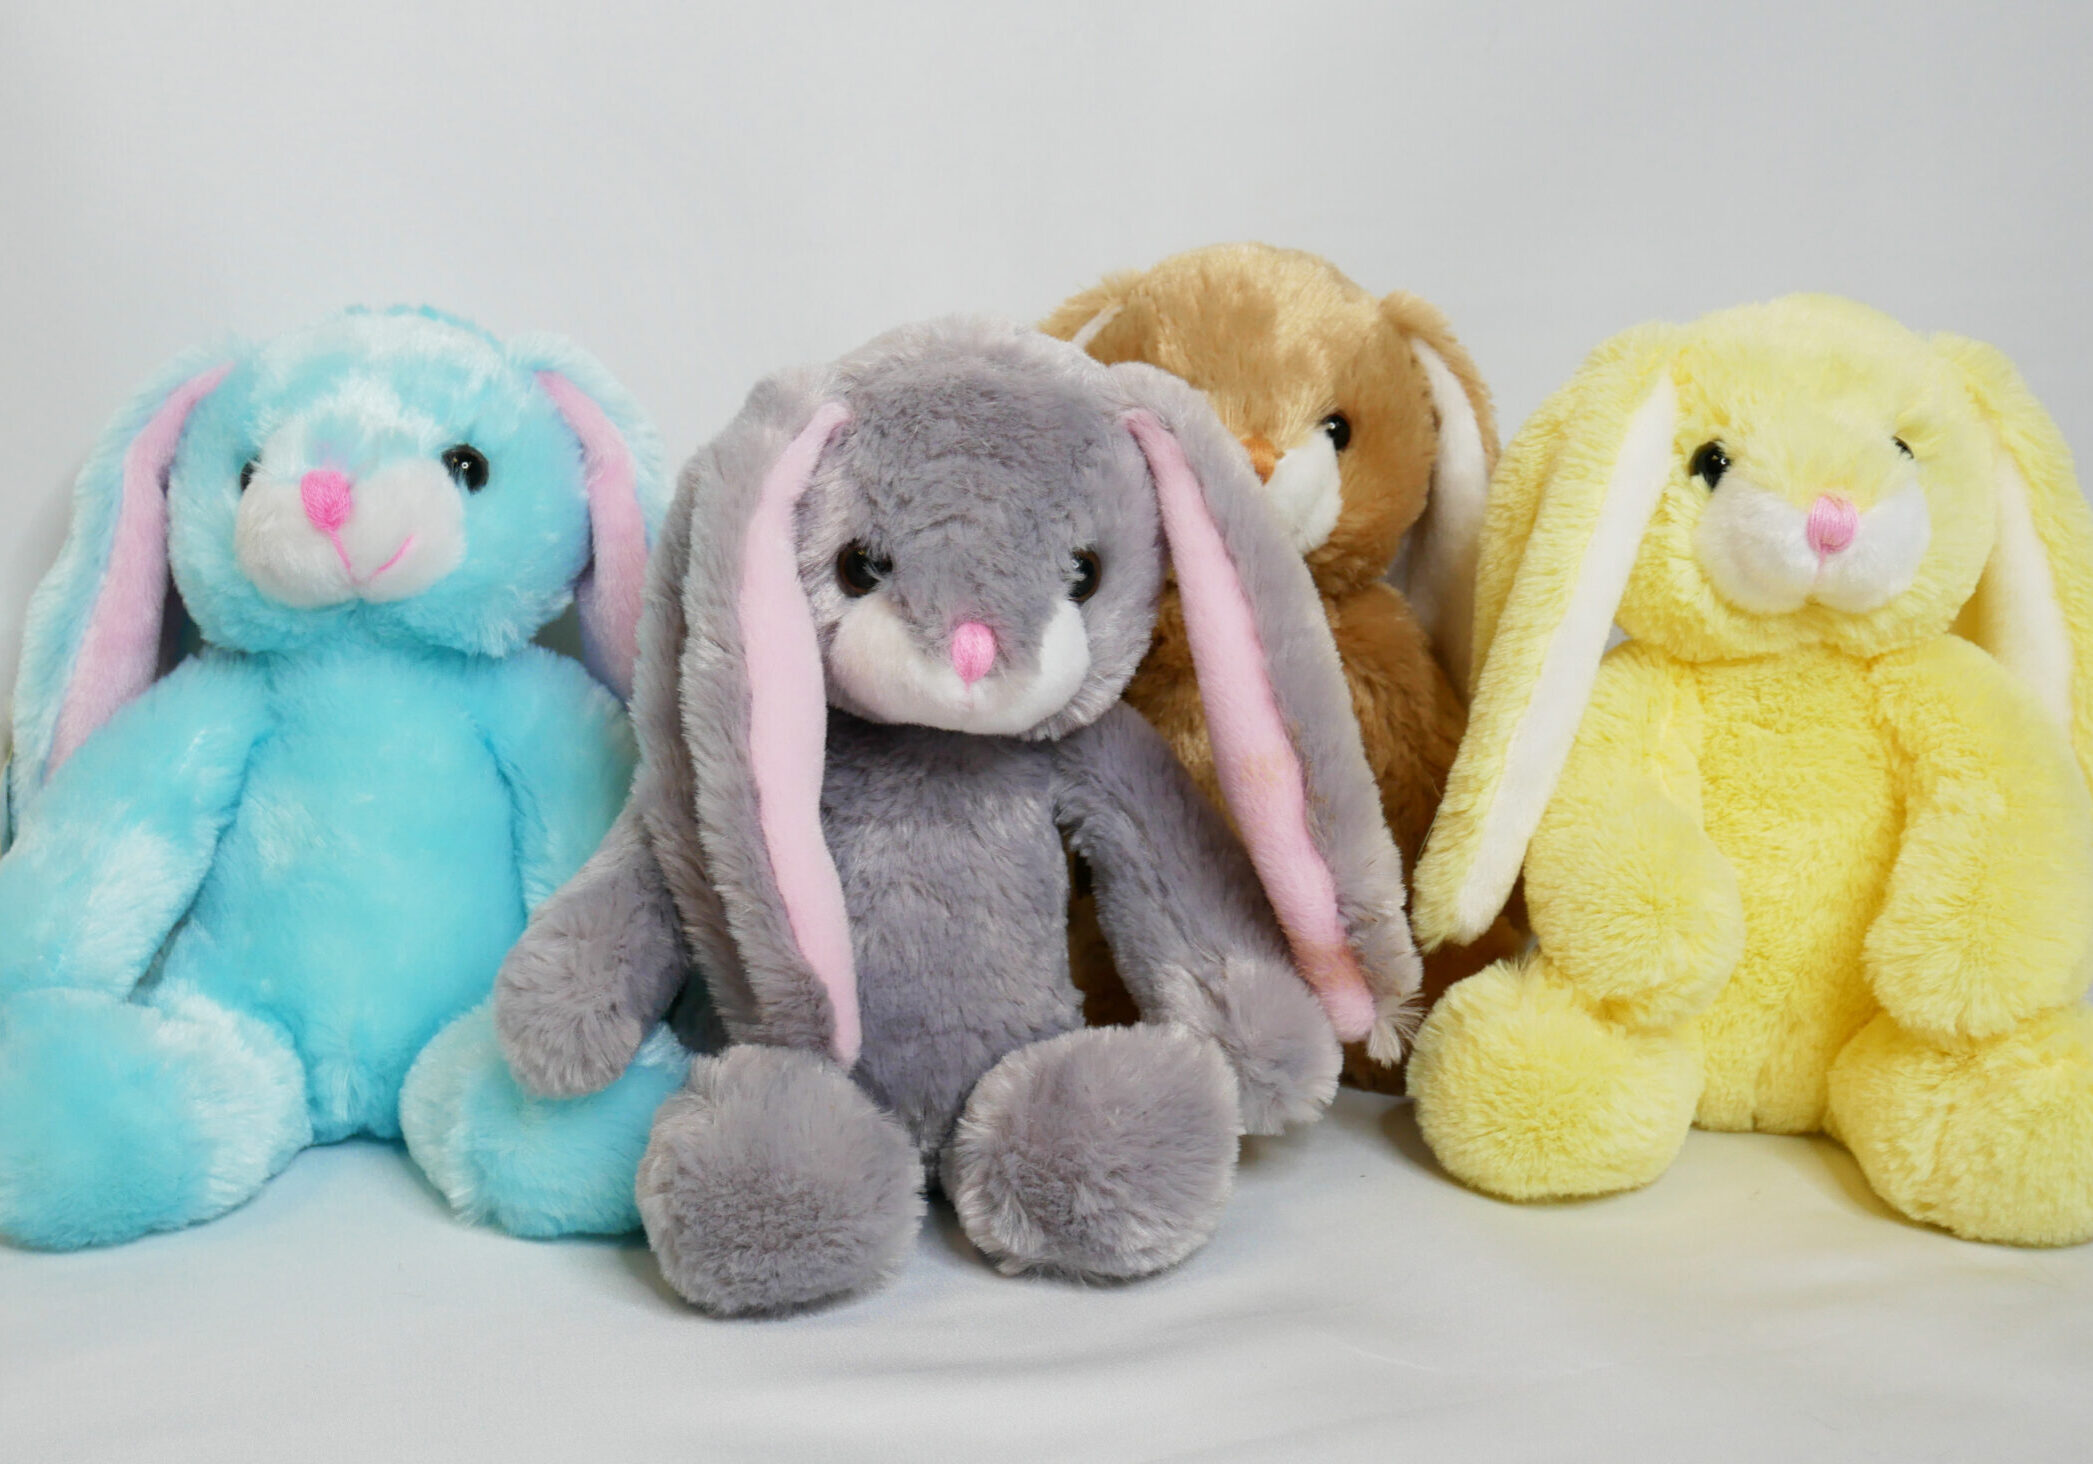 Custom Plush Back-end Freemiums - Fundraising Gift Ideas for Non-Profits, Businesses, and Corporations. All wholesale Back-end Freemium bunnies are custom made to fit the client's branding needs.